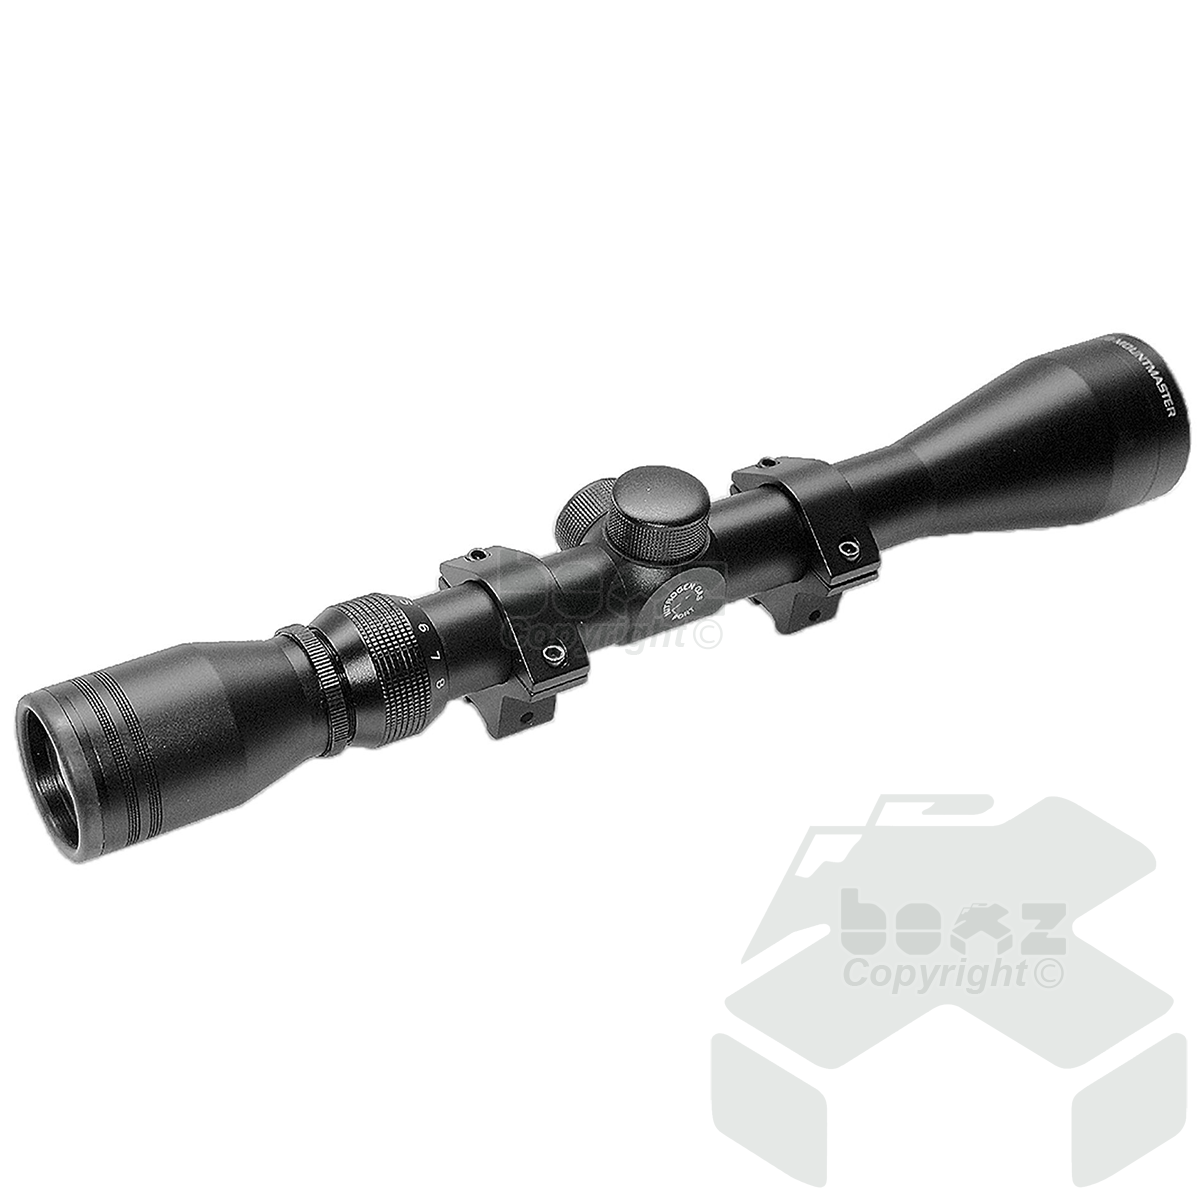 Norica Scope 3-9x40 with Two-piece Mounts